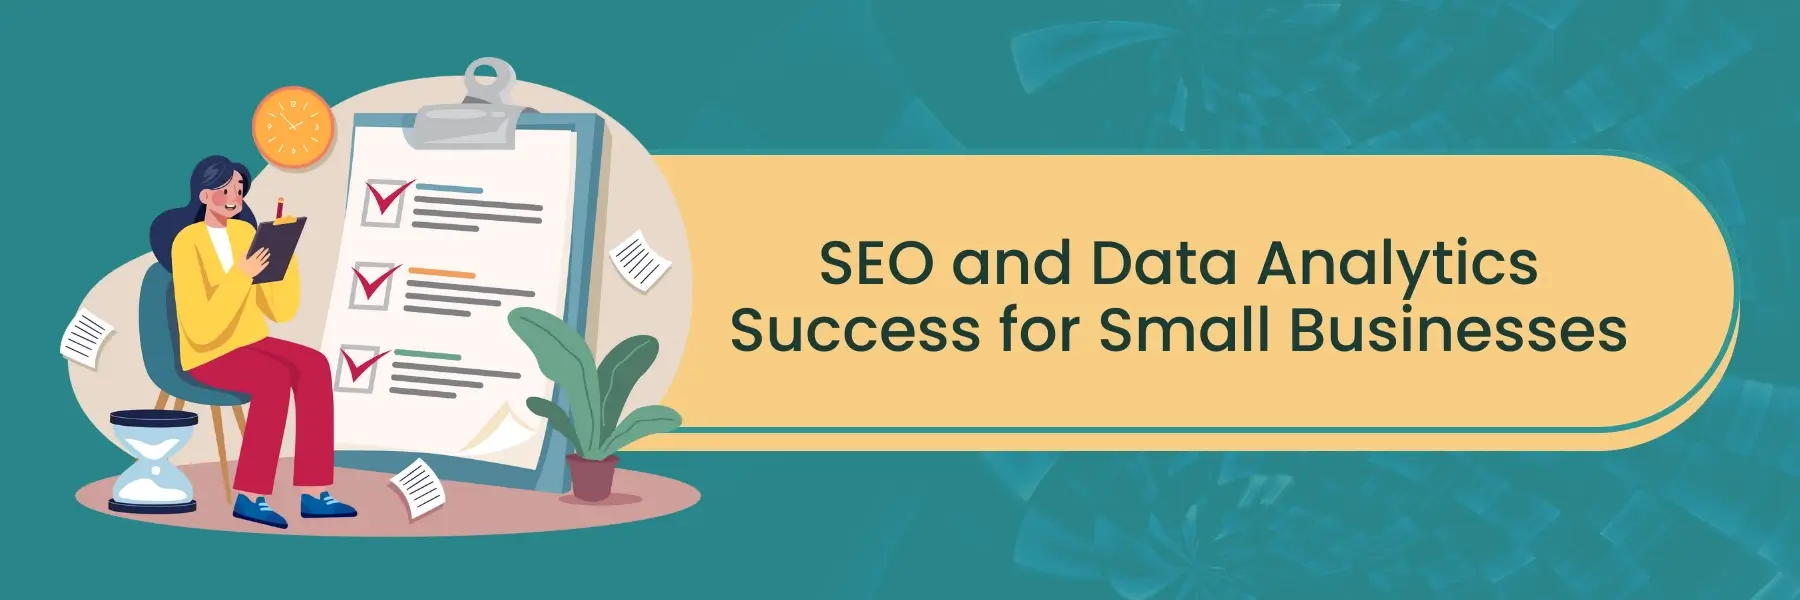 SEO and Data Analytics Success for Small Businesses in Melbourne